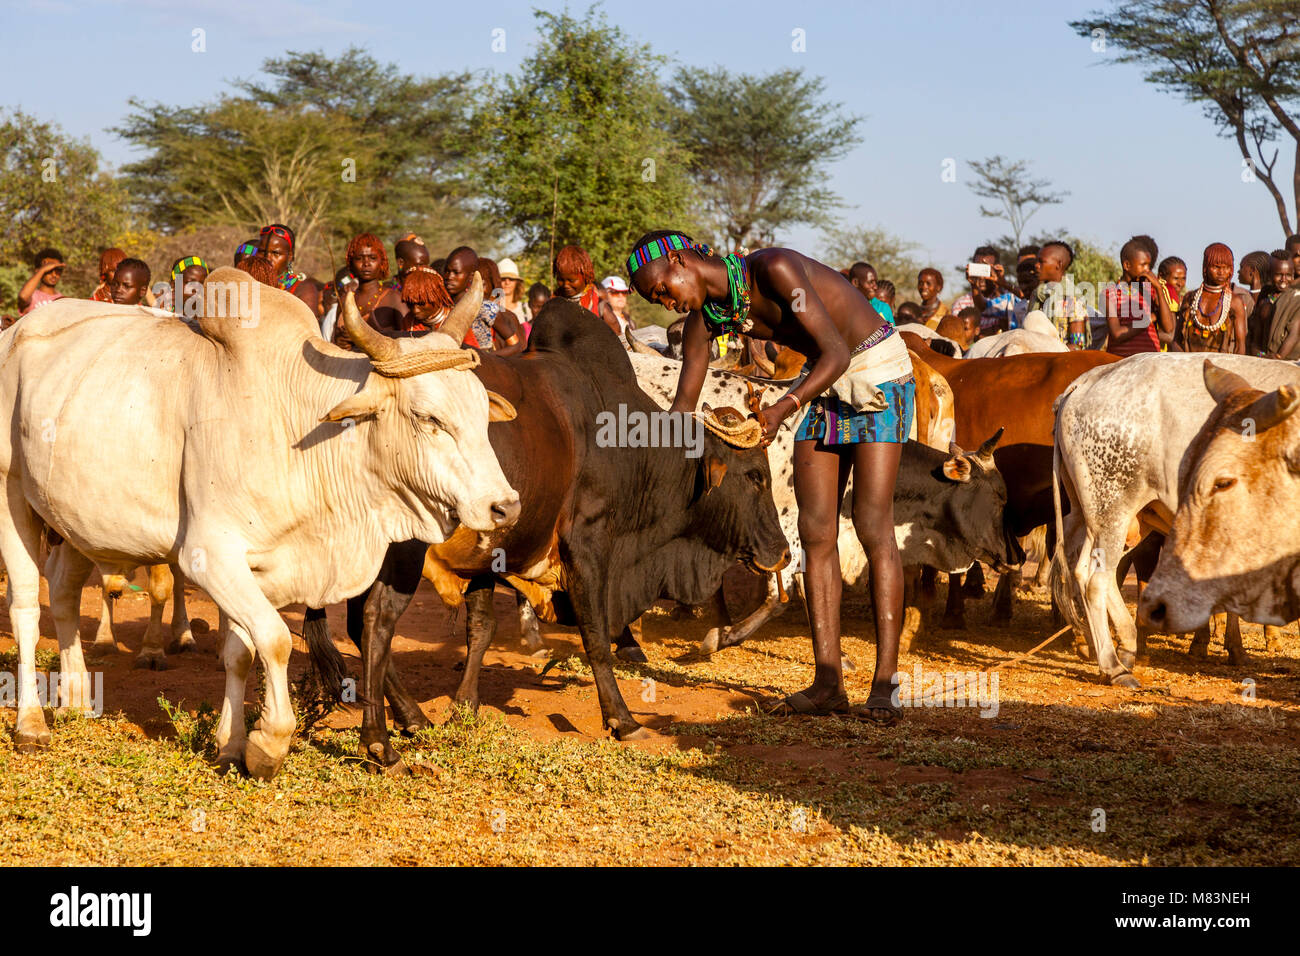 A Hamar Tribesman Preparing Cattle For A Bull Jumping Ceremony, Dimeka, Omo Valley, Ethiopia Stock Photo